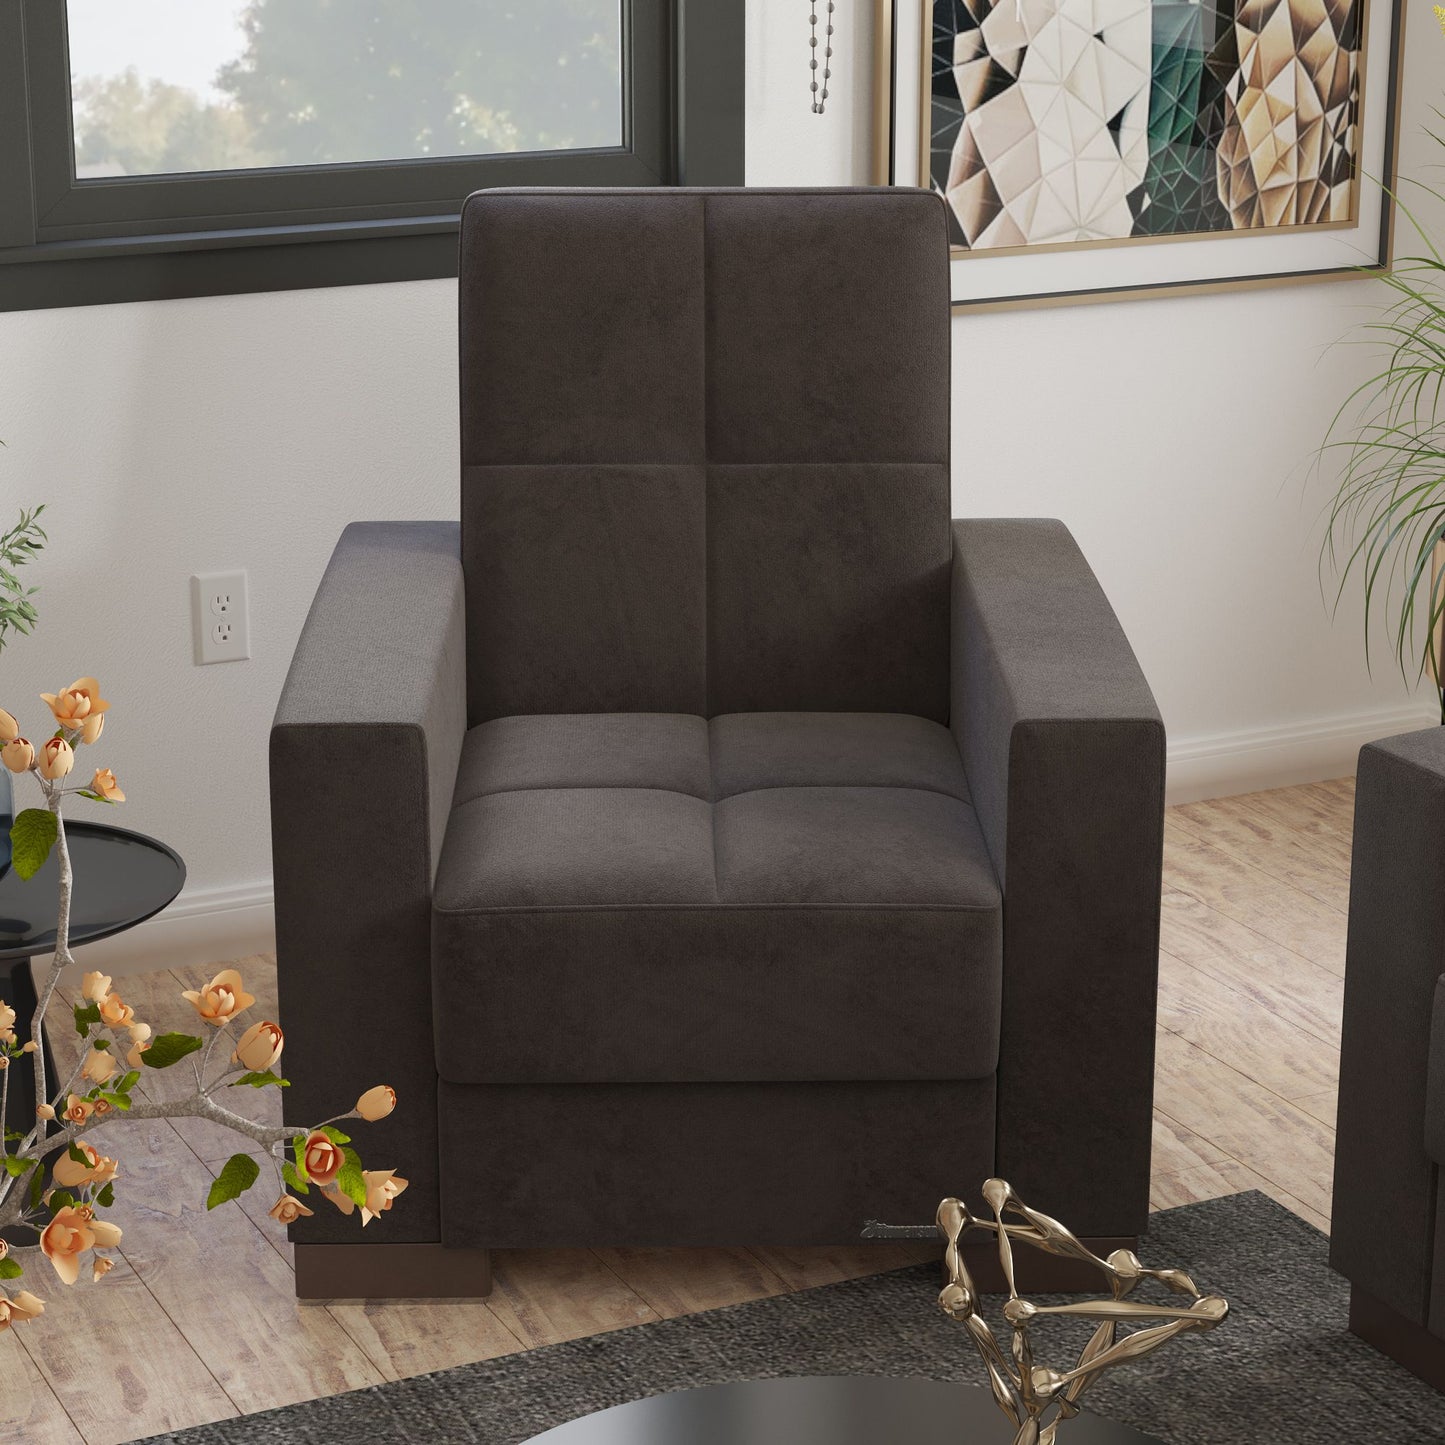 36" Brown Tufted Microfiber Convertible Chair